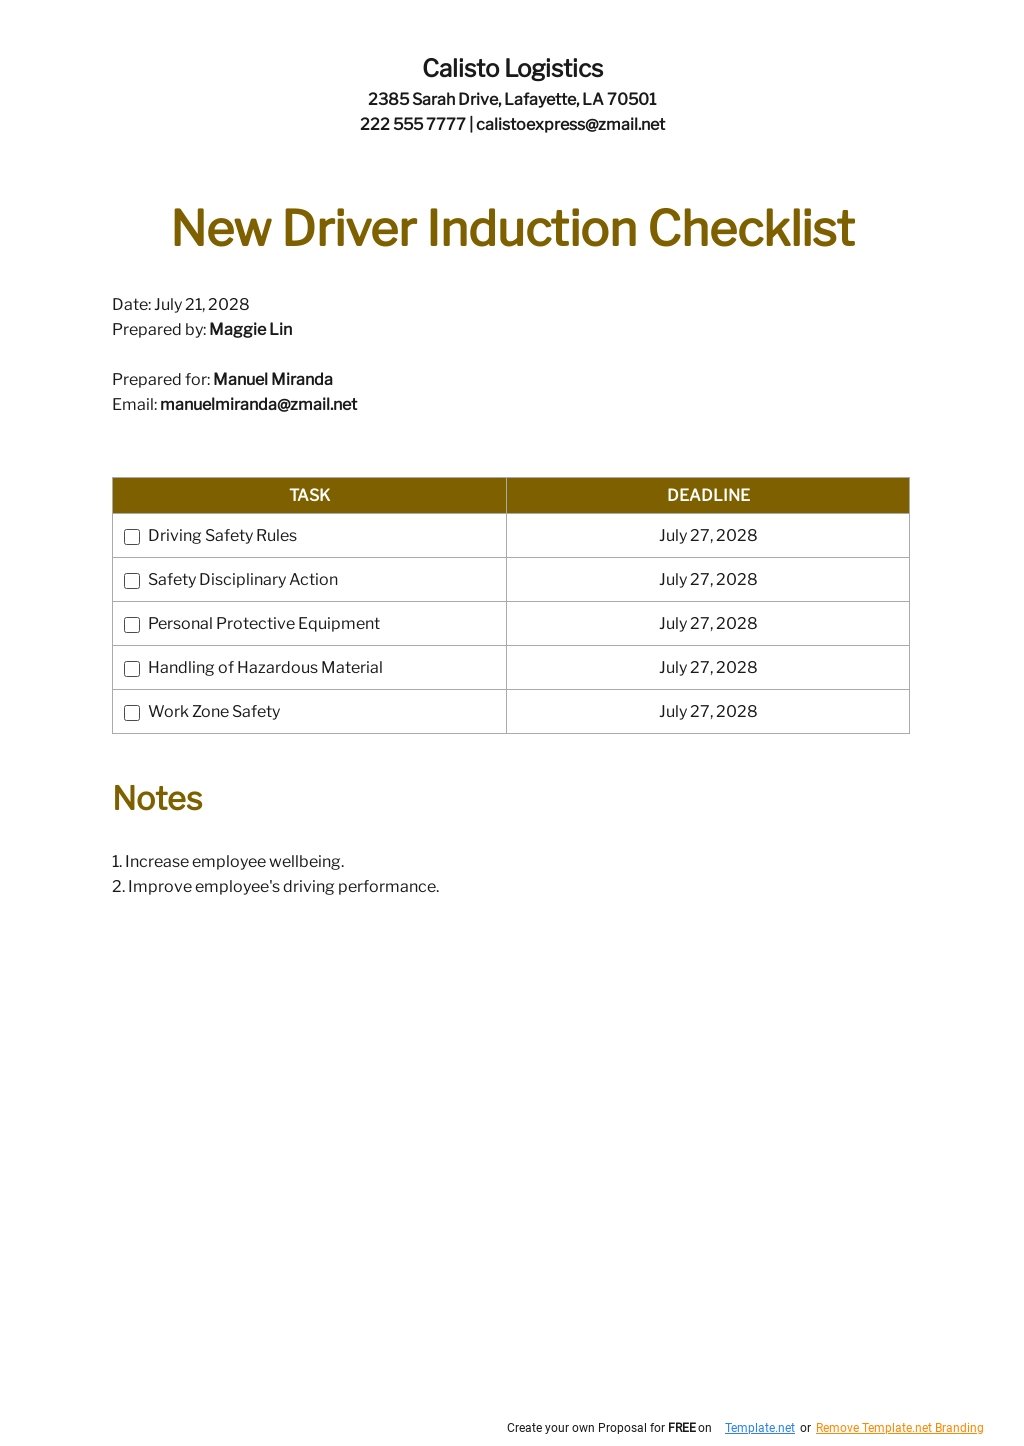 New Driver Induction Checklist Template